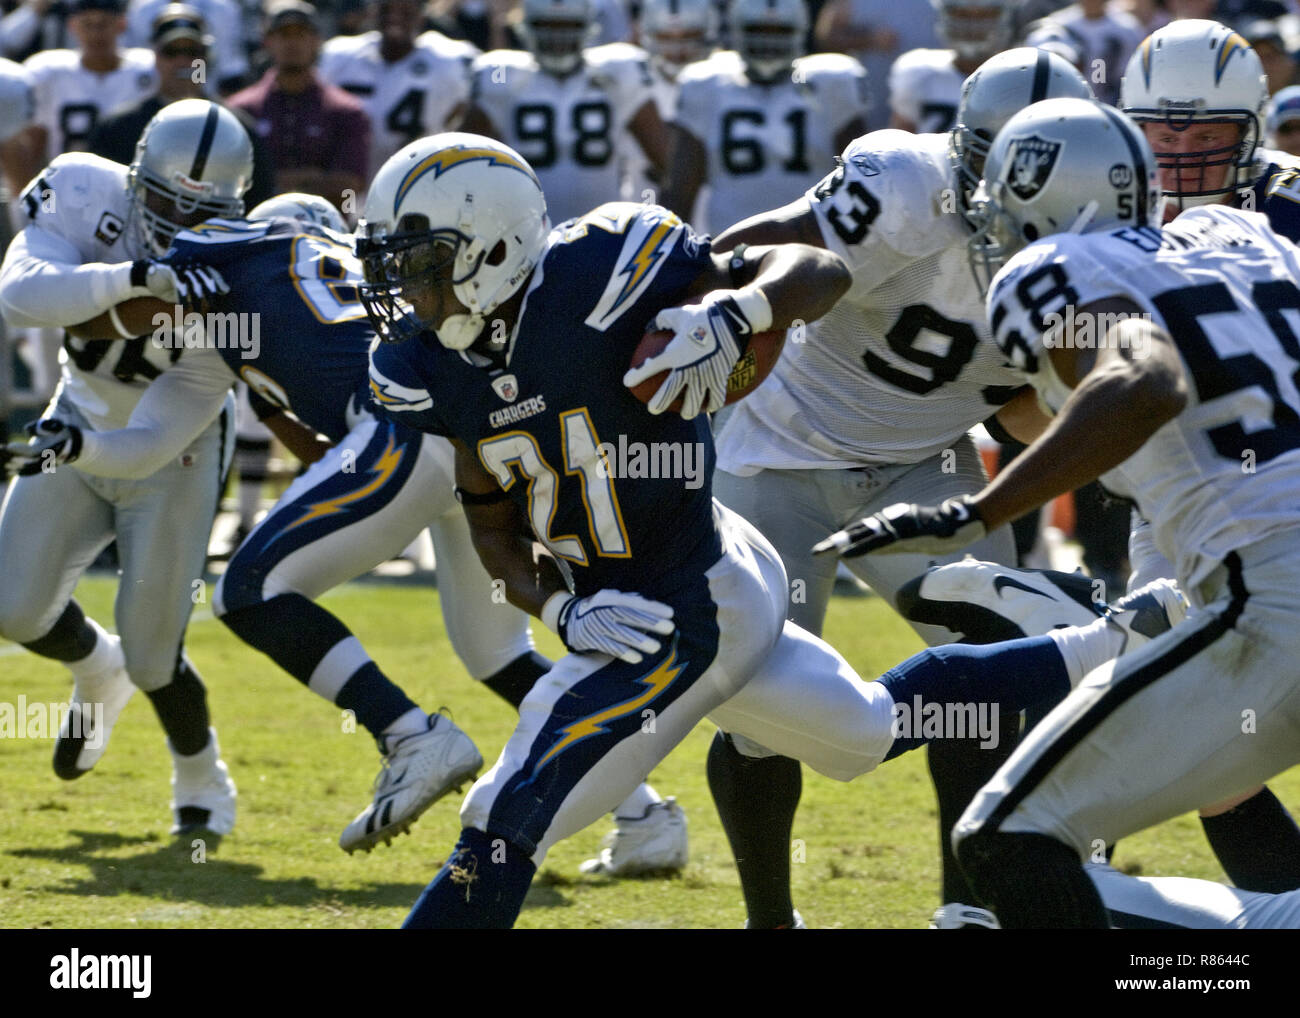 Oakland, California, USA. 28th Sep, 2008. San Diego Chargers running back LaDainian Tomlinson #21 finds a seam to run in between Oakland Raiders defensive tackle Tommy Kelly #93 and defensive end Kalimba Edwards #58 on Sunday, September 28, 2008, at Oakland-Alameda County Coliseum in Oakland, California. The Chargers defeated the Raiders 28-18. Credit: Al Golub/ZUMA Wire/Alamy Live News Stock Photo